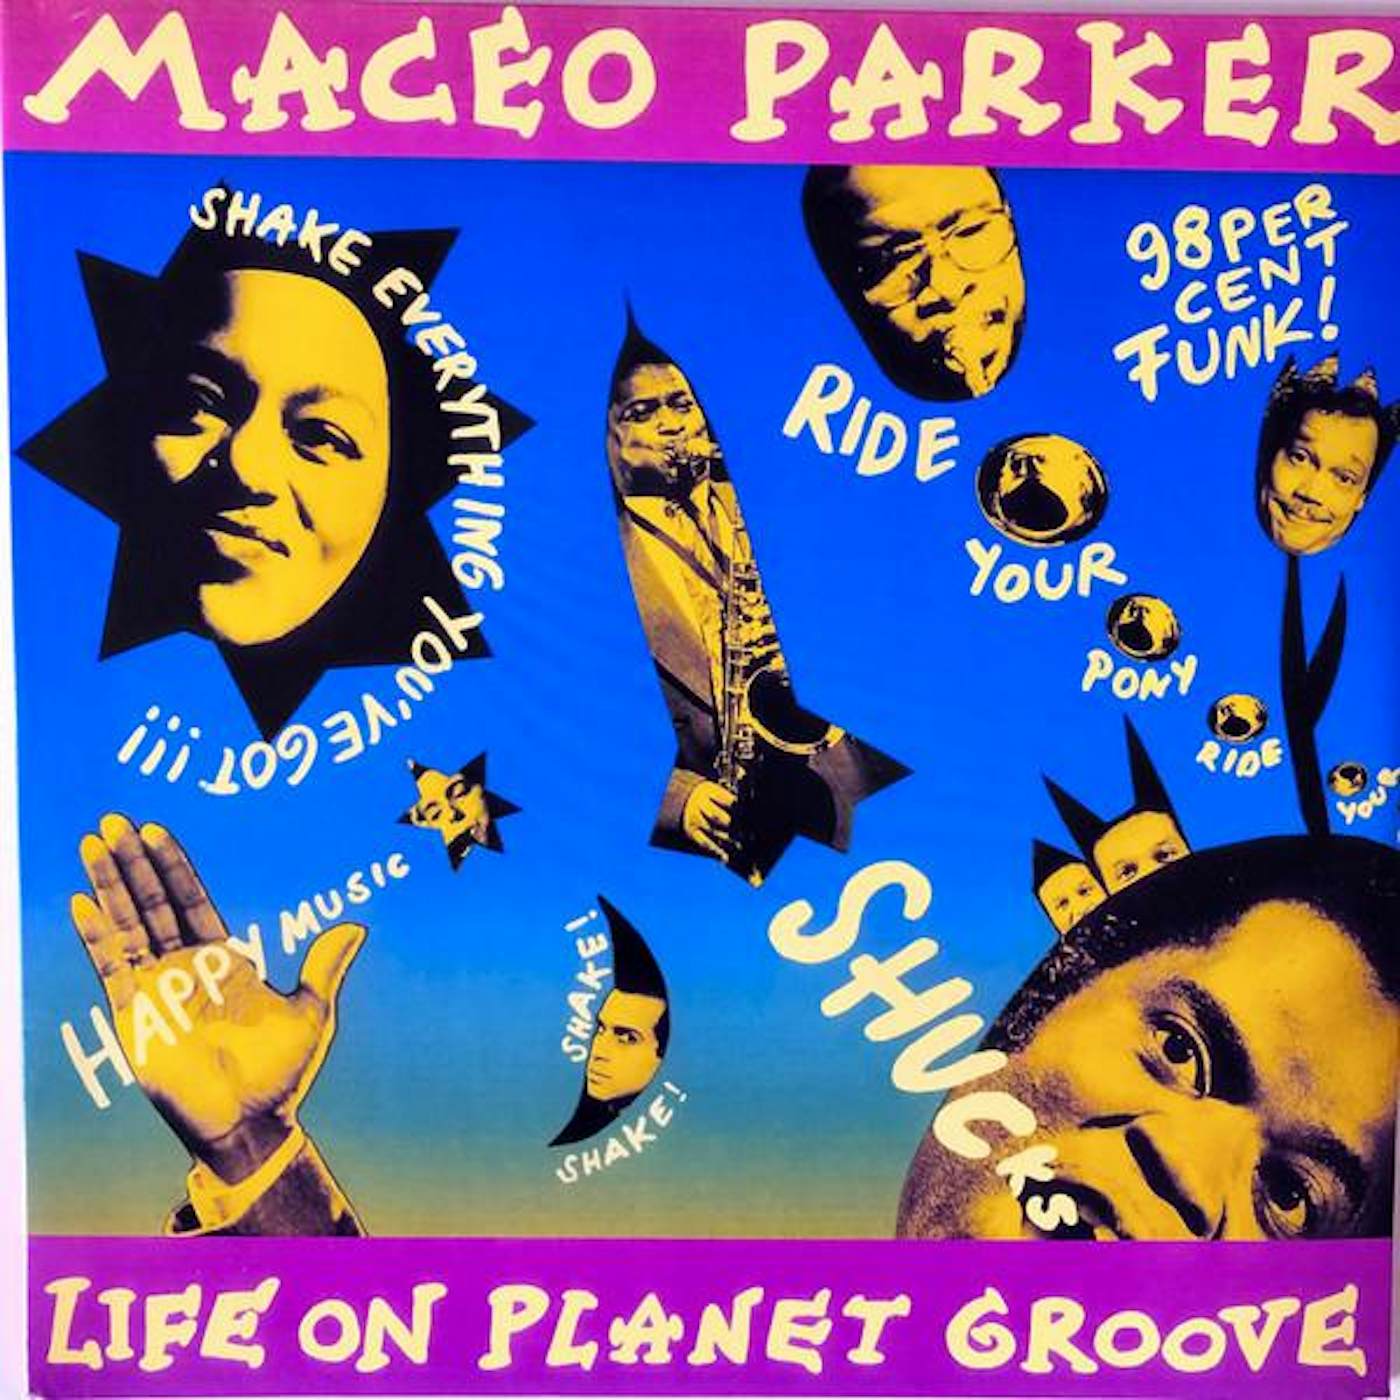 Maceo Parker LIFE ON PLANETGROOVE Vinyl Record